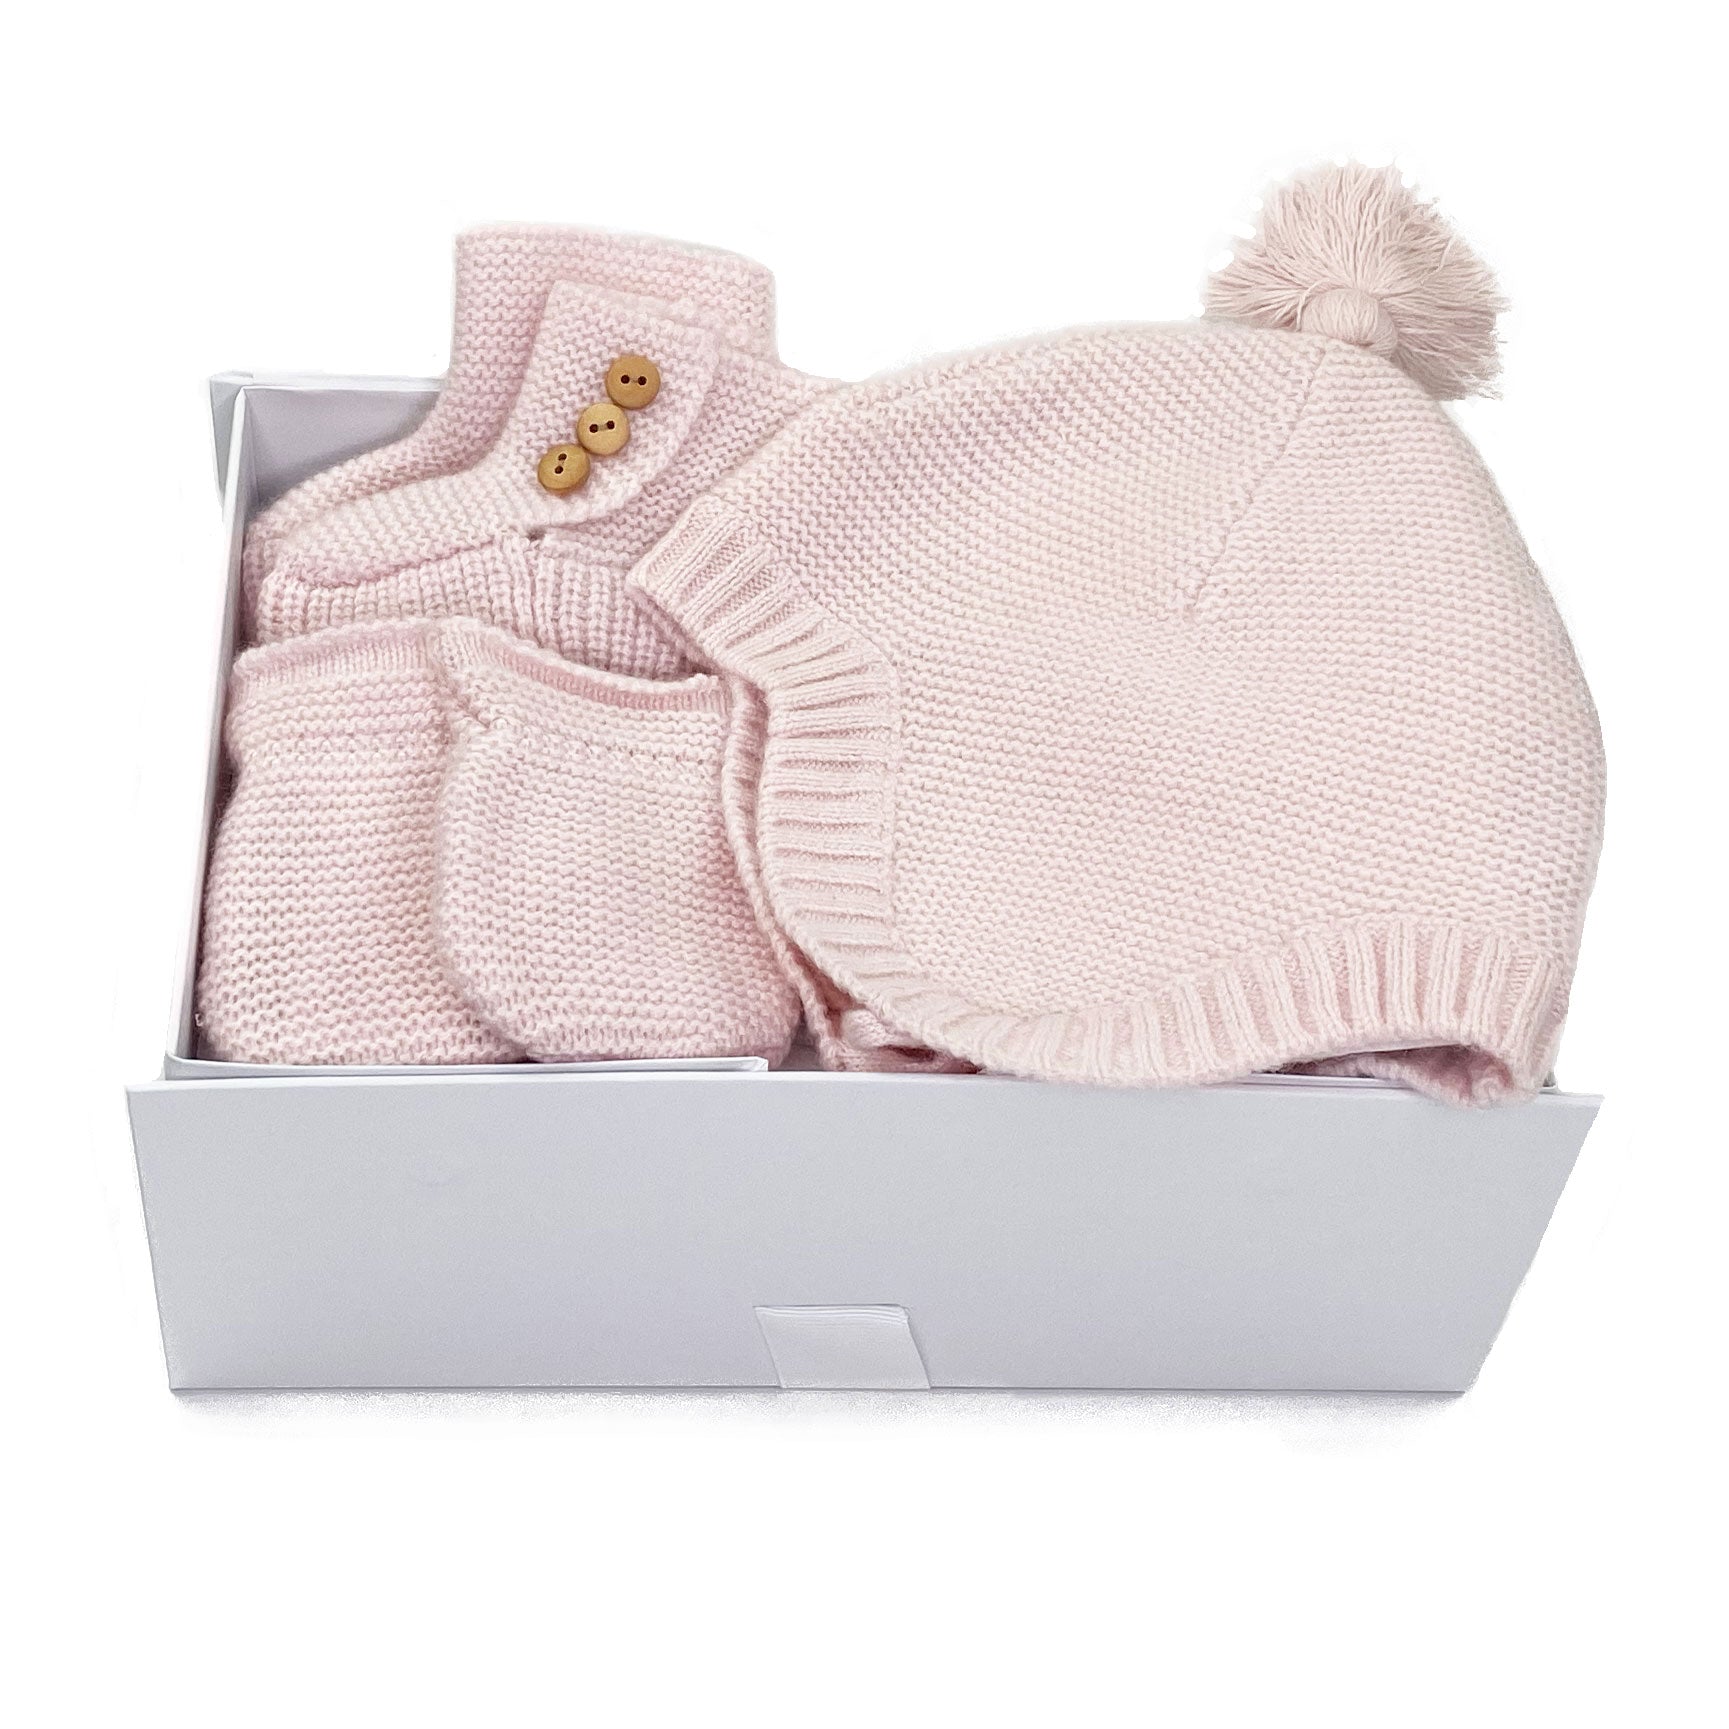 Luxury cashmere Baby Gift Set in Pink 